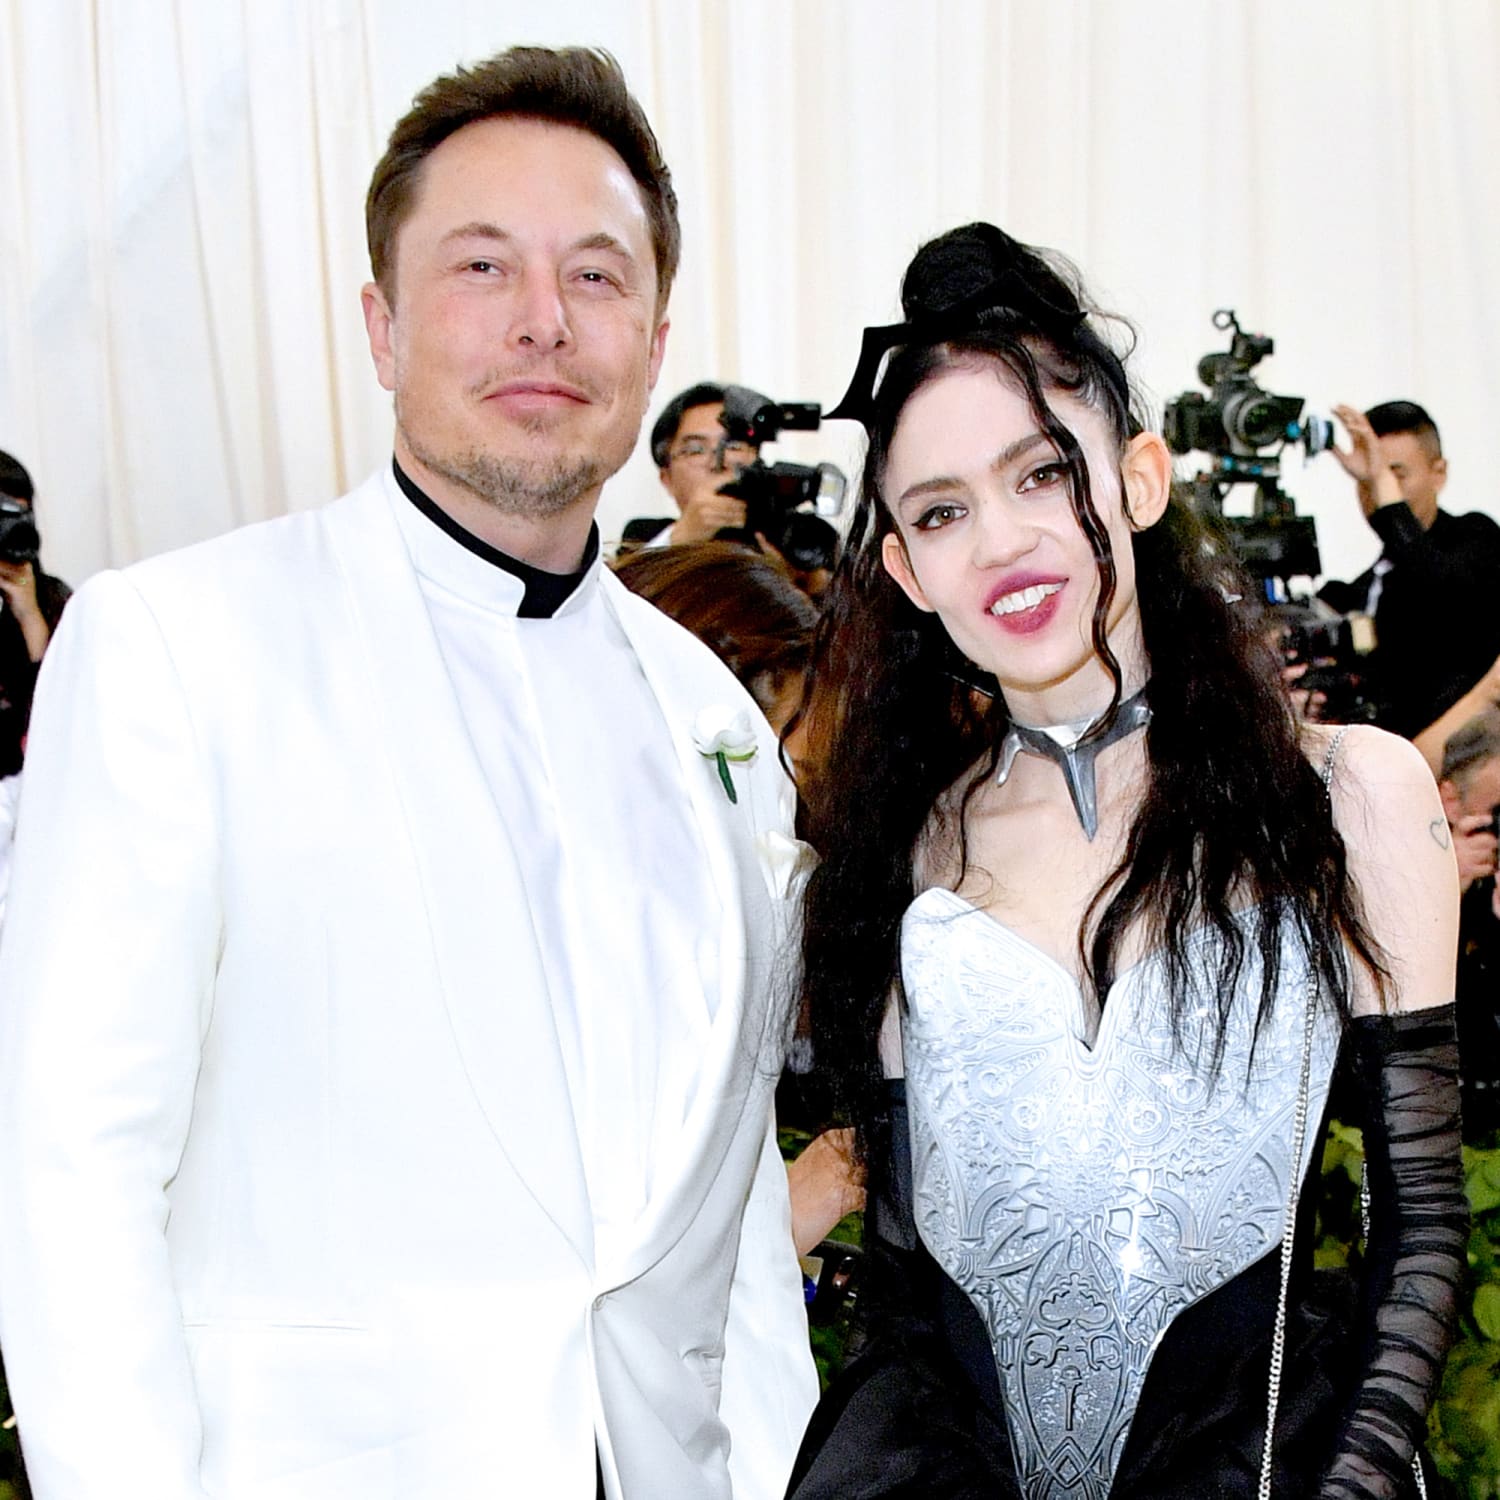 Elon Musk and Grimes split after 3 years of dating